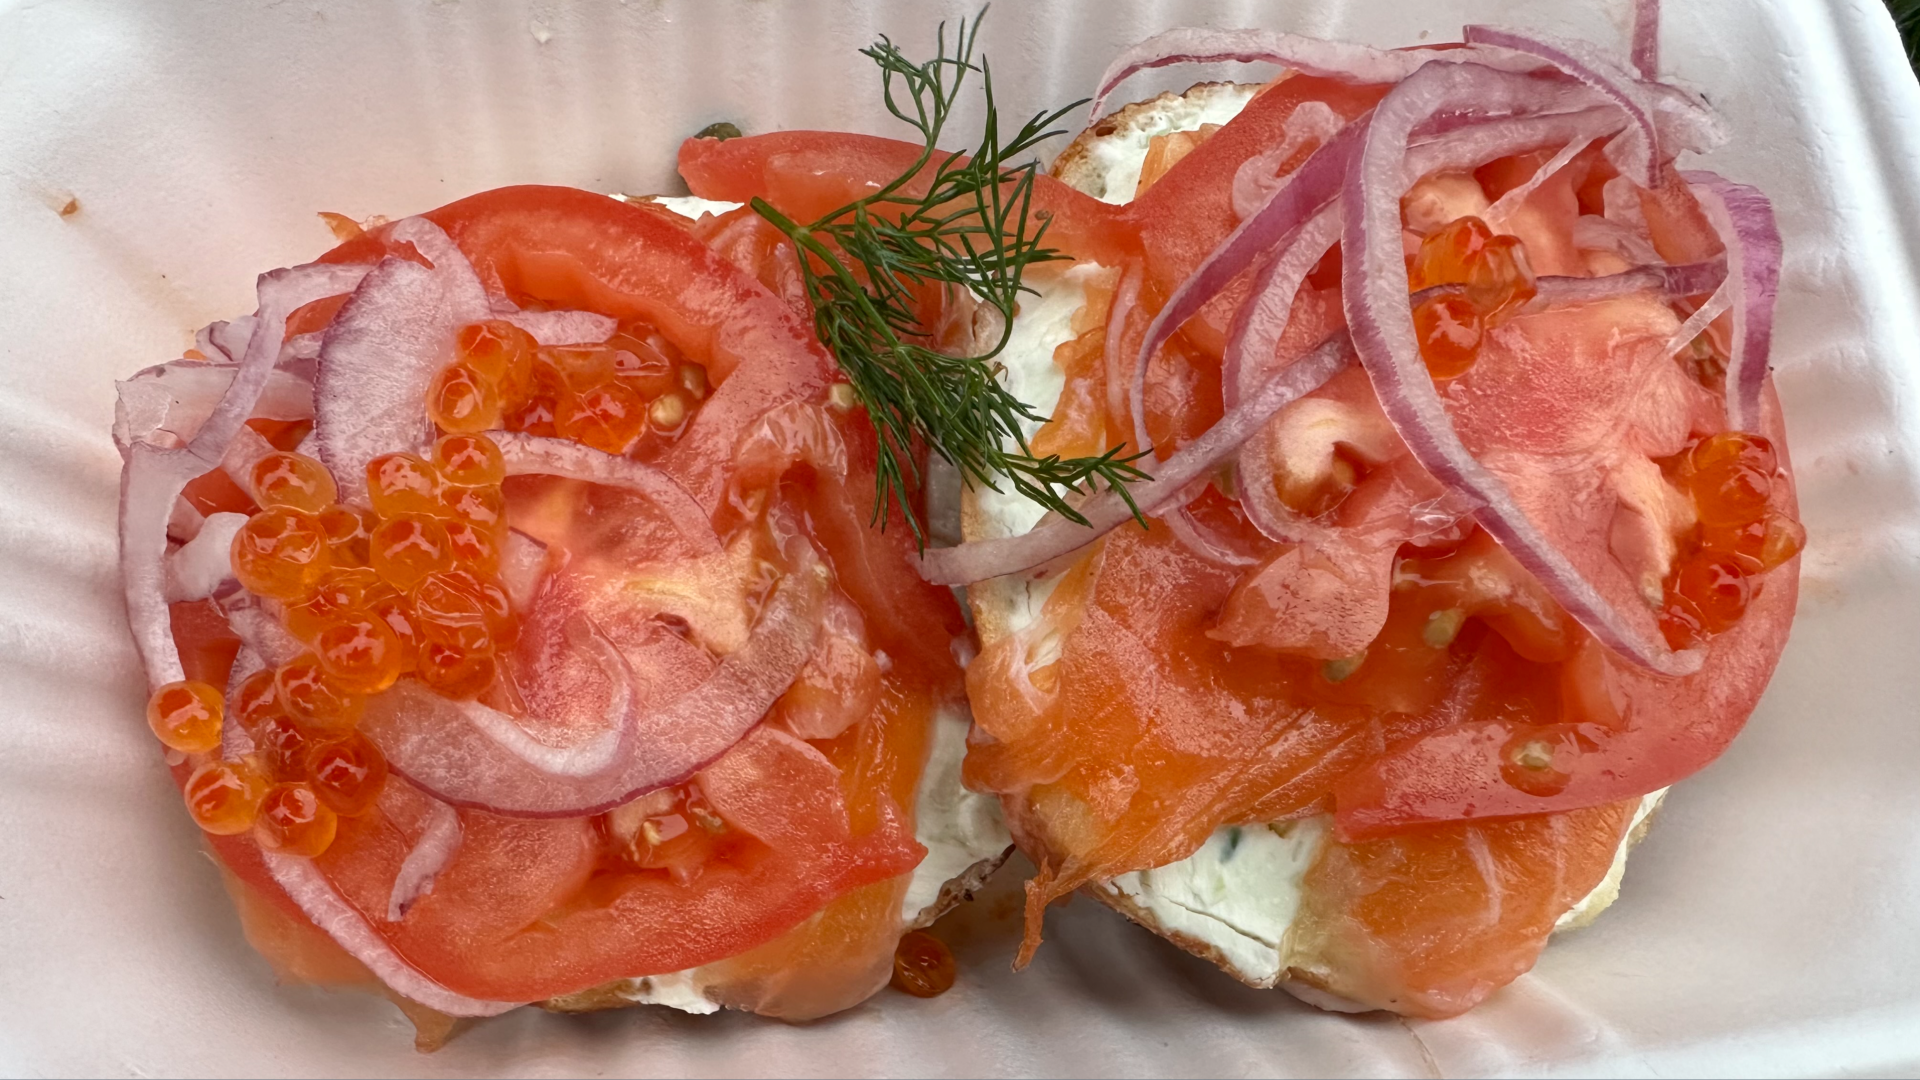 Tomato with roe and salmon on top of a bagel that is served open faced.